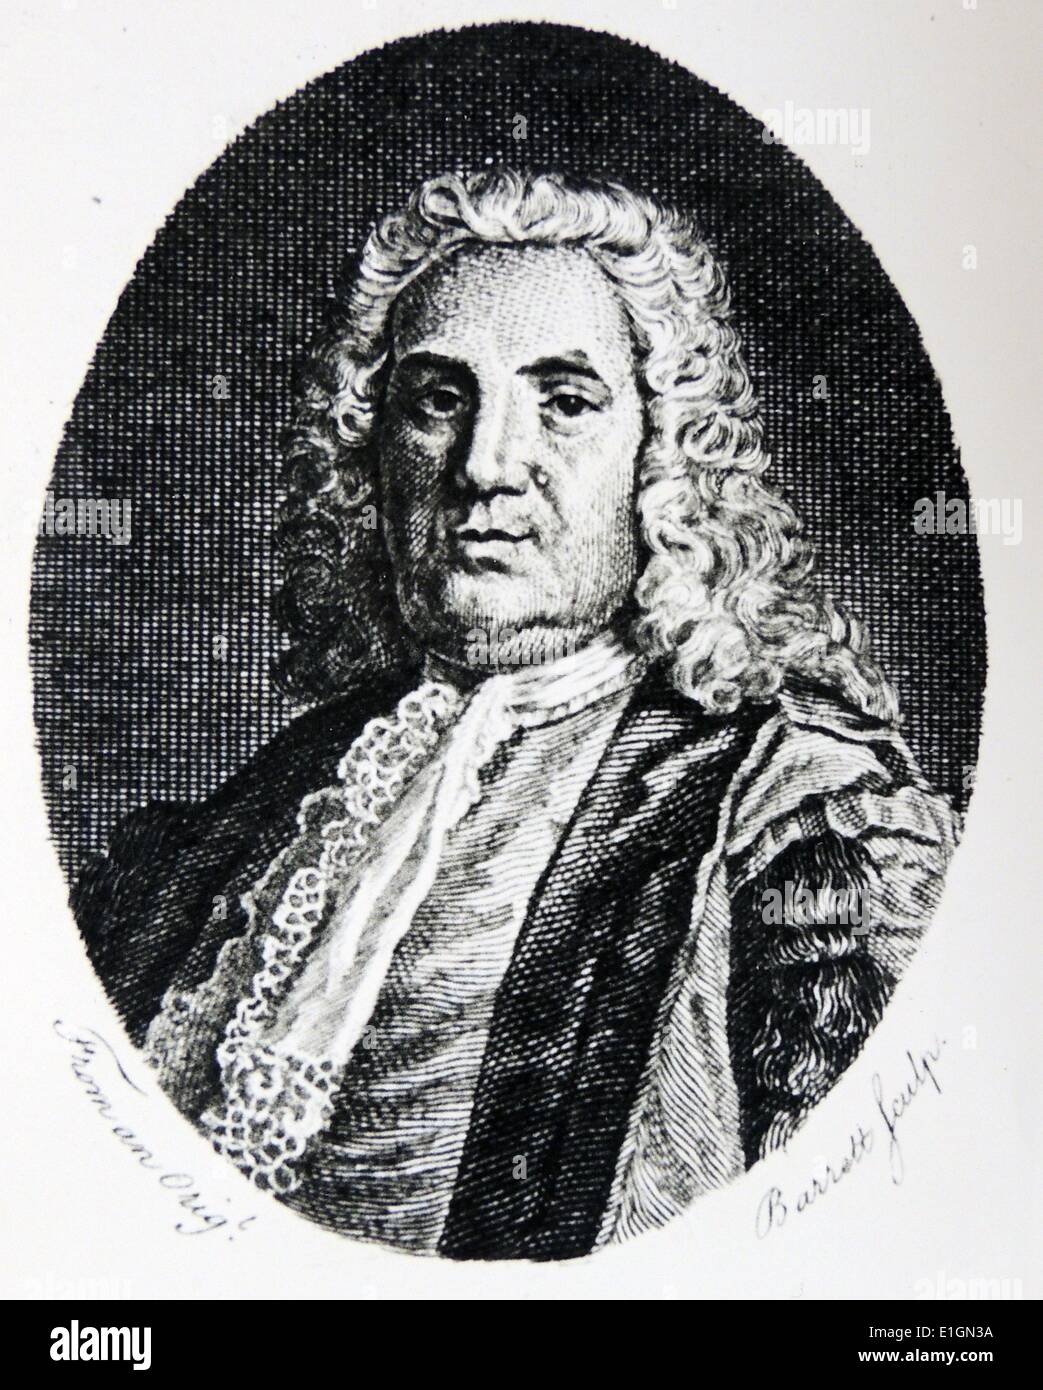 Richard Mead (1673-1754) Fashionable London physician. One of his patients was Isaac Newton. Engraving, London, 1753. Stock Photo